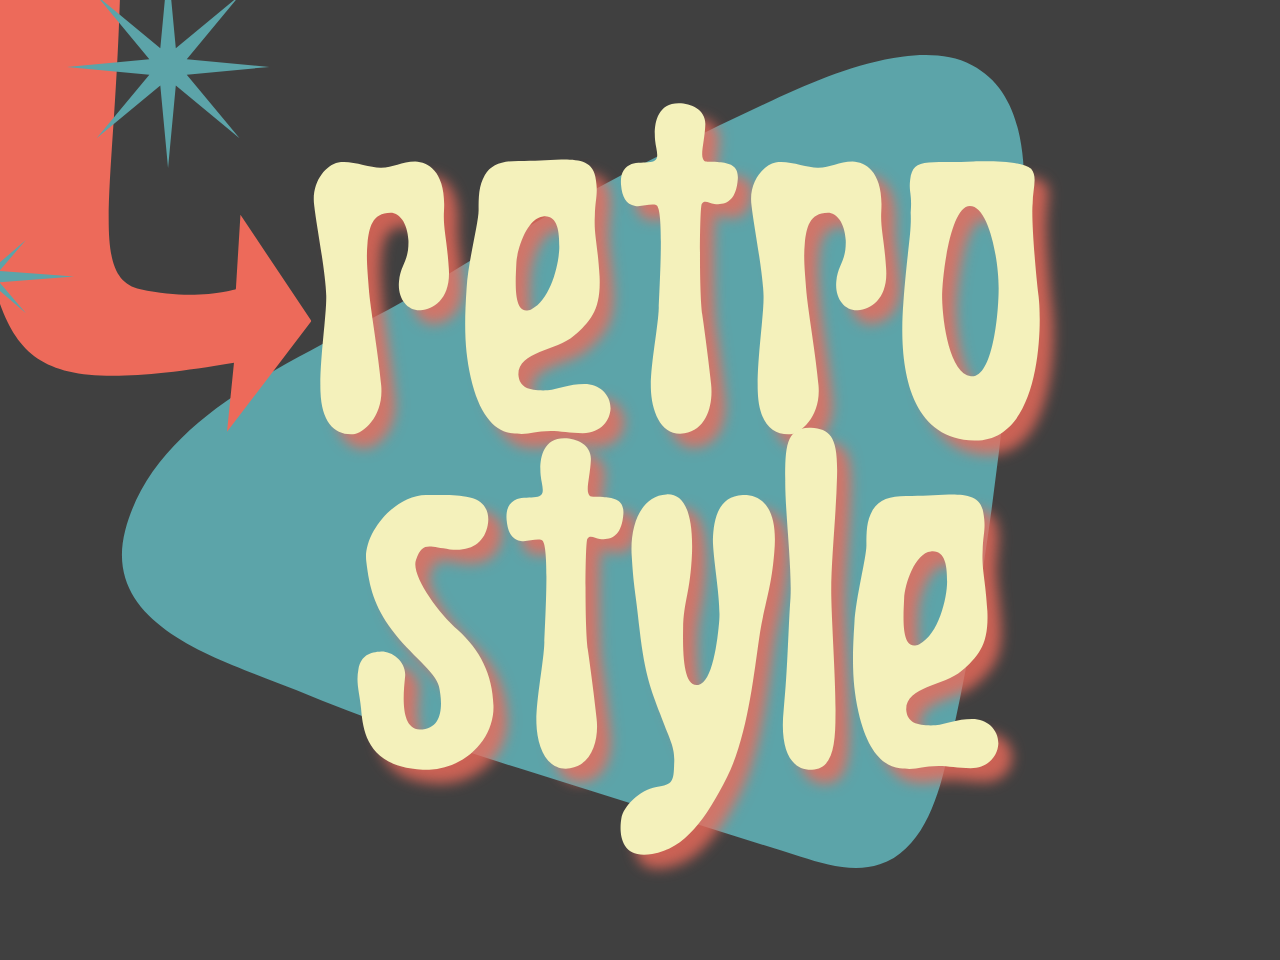 Retro style text and shape bubble.